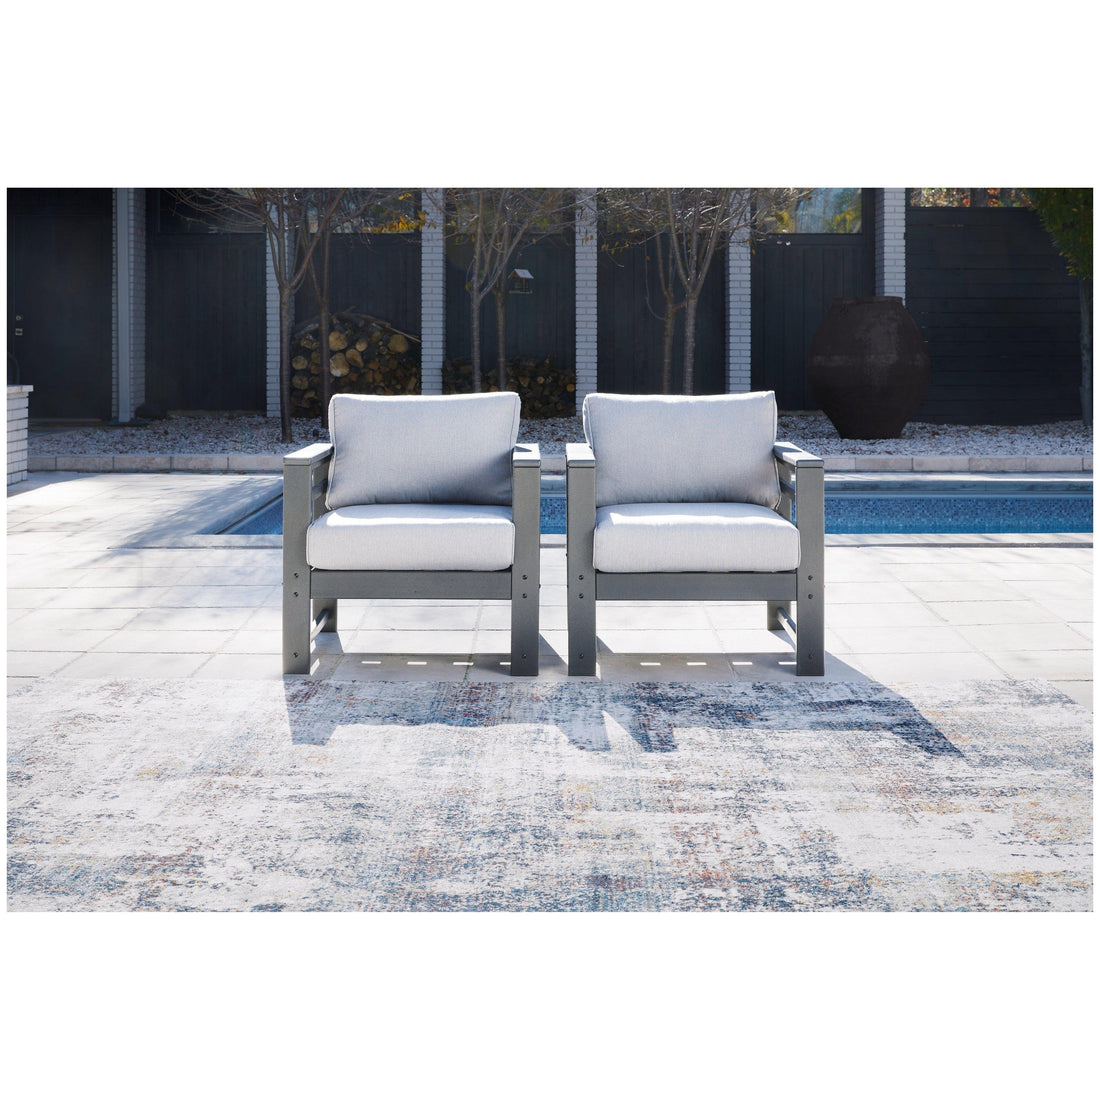 Amora Outdoor Lounge Chair with Cushion (Set of 2) Ash-P417-820